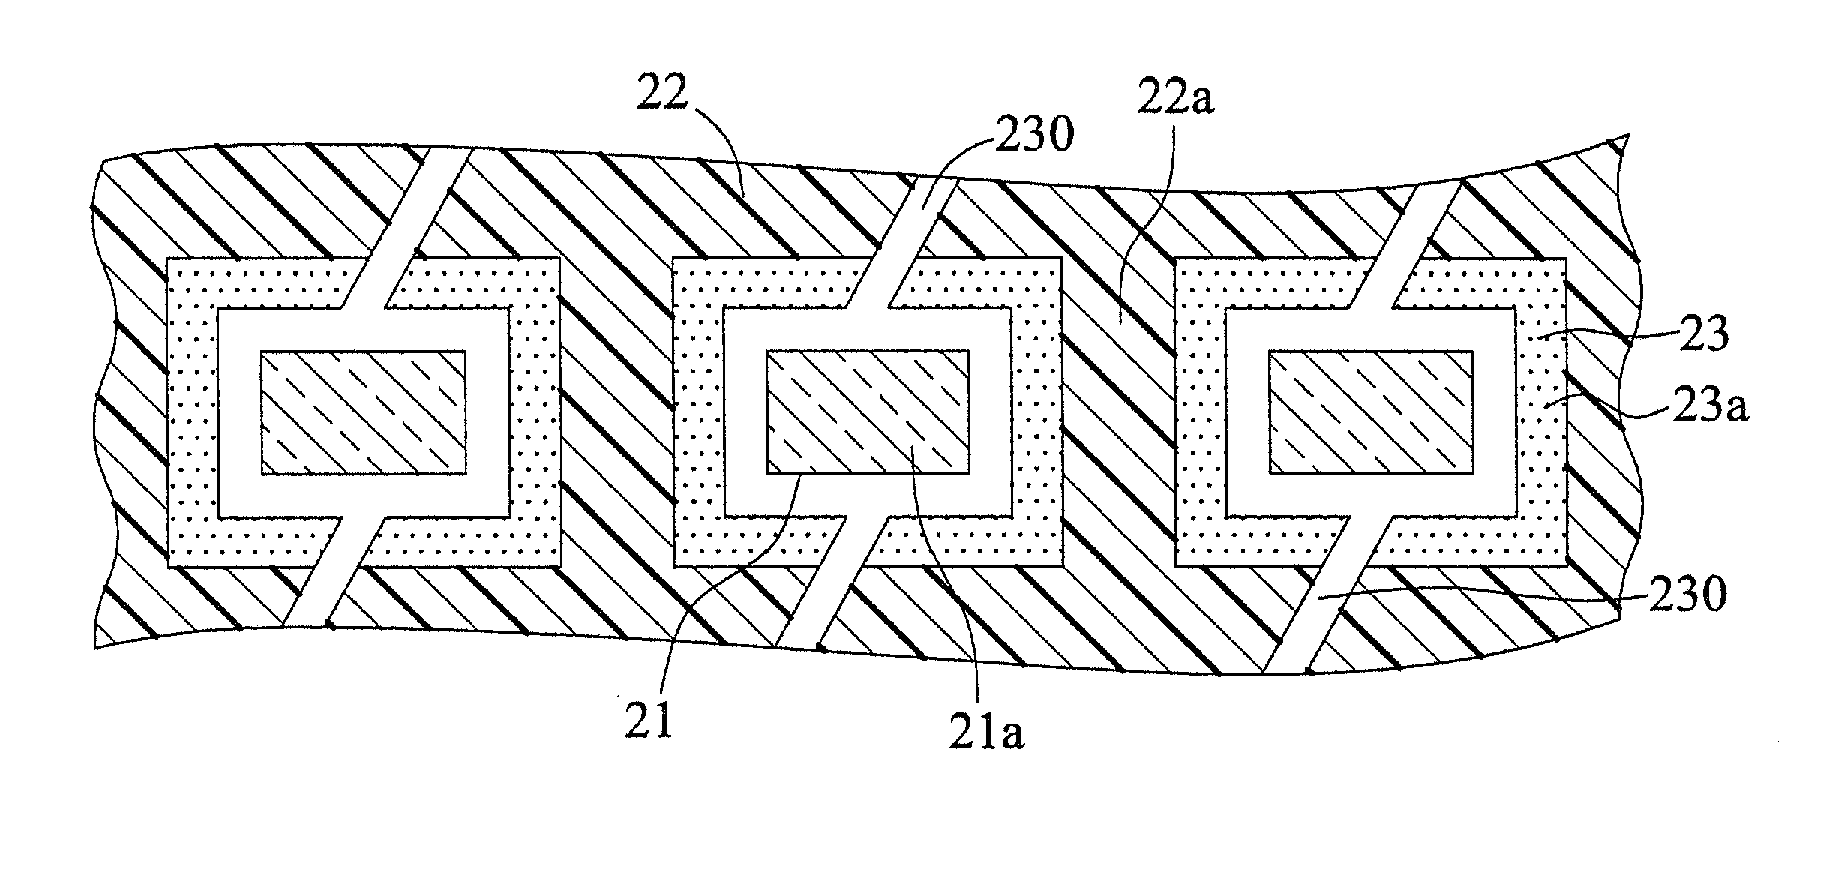 Light-emitting package structure and method of fabricating the same